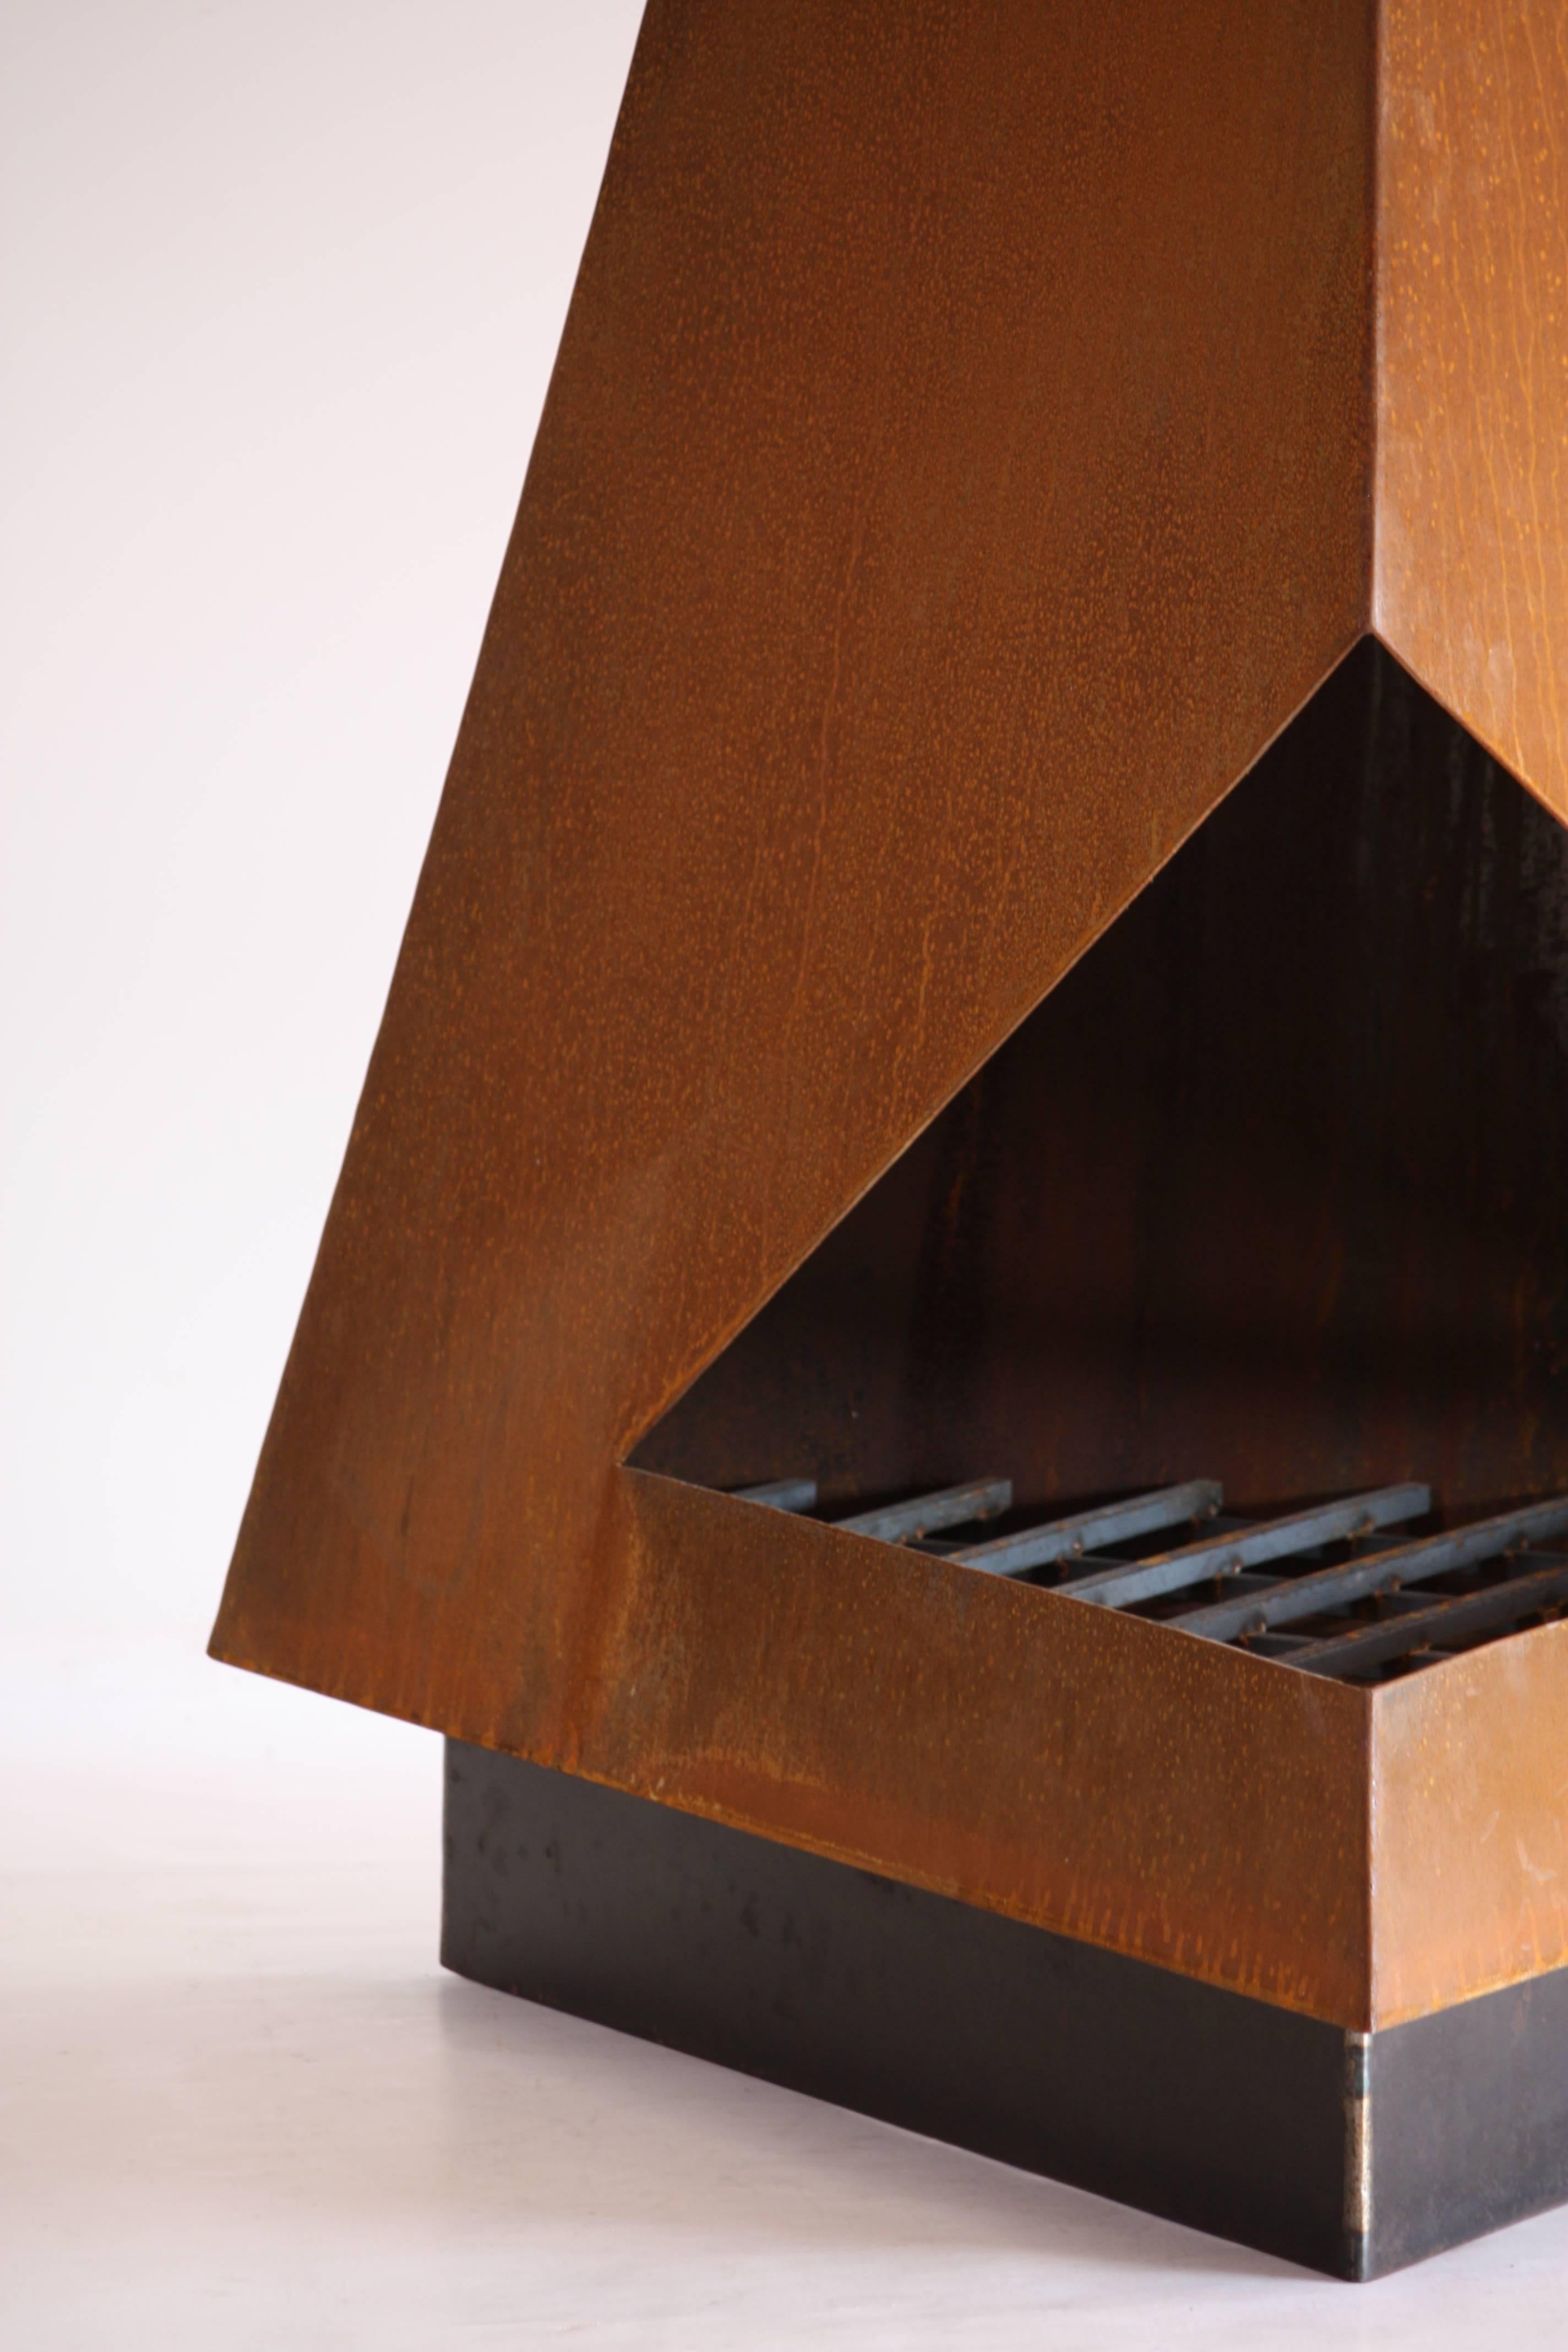 The Thee by Space 20th Century Modern is not your normal chiminea or fireplace. This high design, steel sculptural piece will make a statement in any outdoor space. Functionally, it is perfect on that cold evening, but also serves as an amazing art